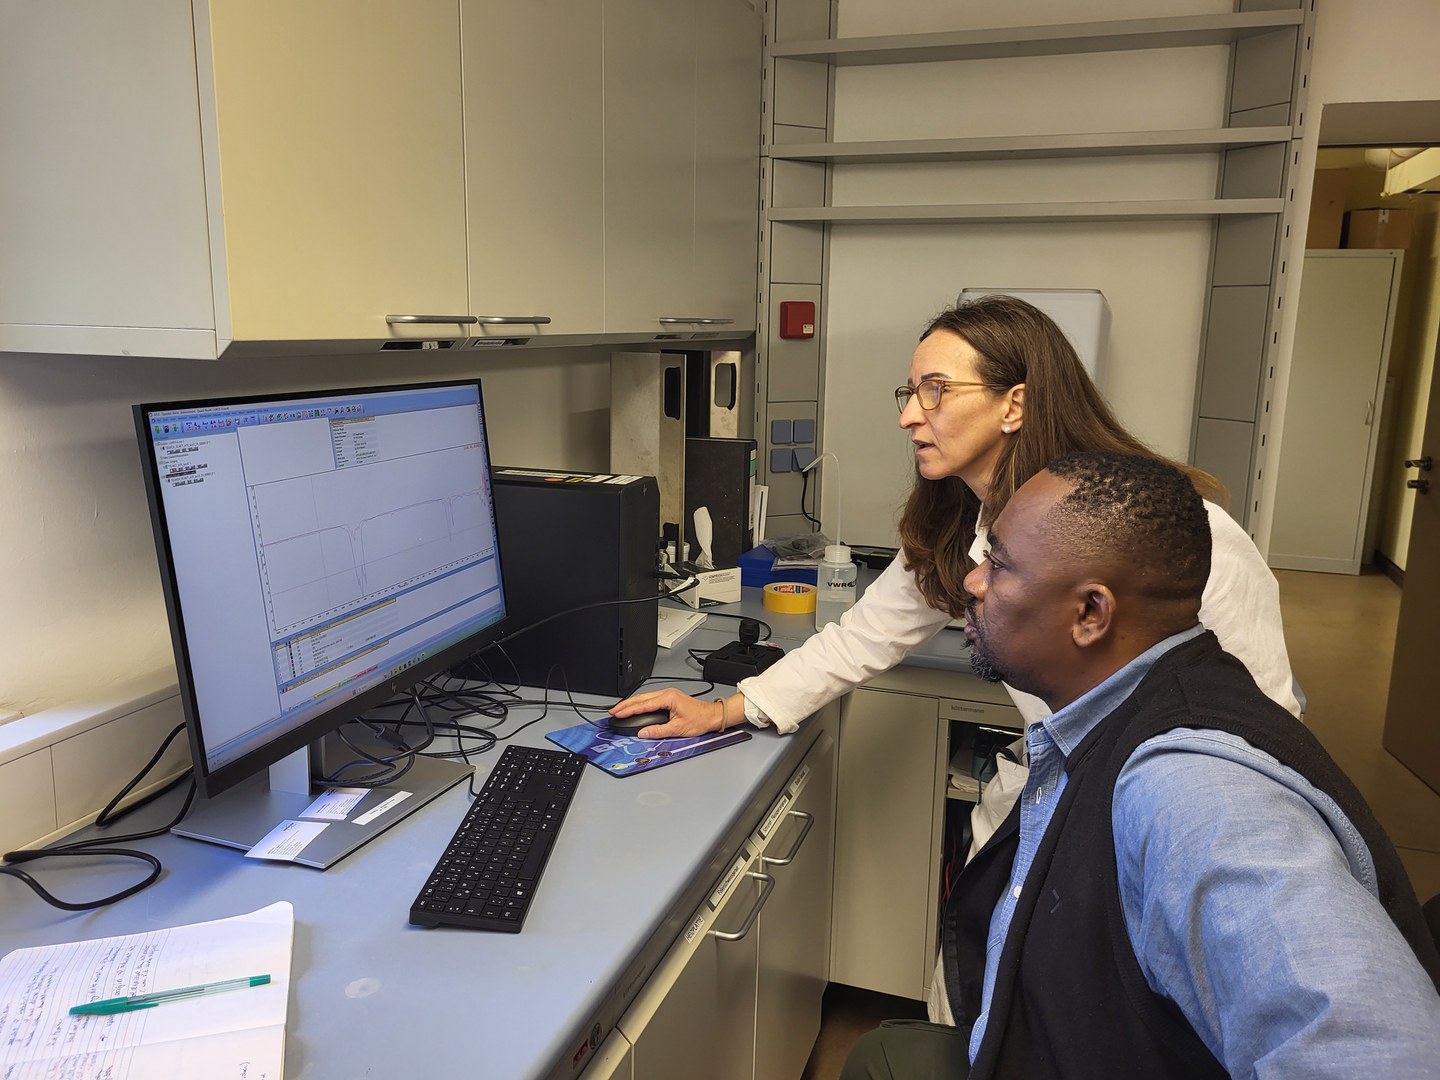 Dr. Kimambo visiting the laboratories at the Department of Geography, University of Bonn